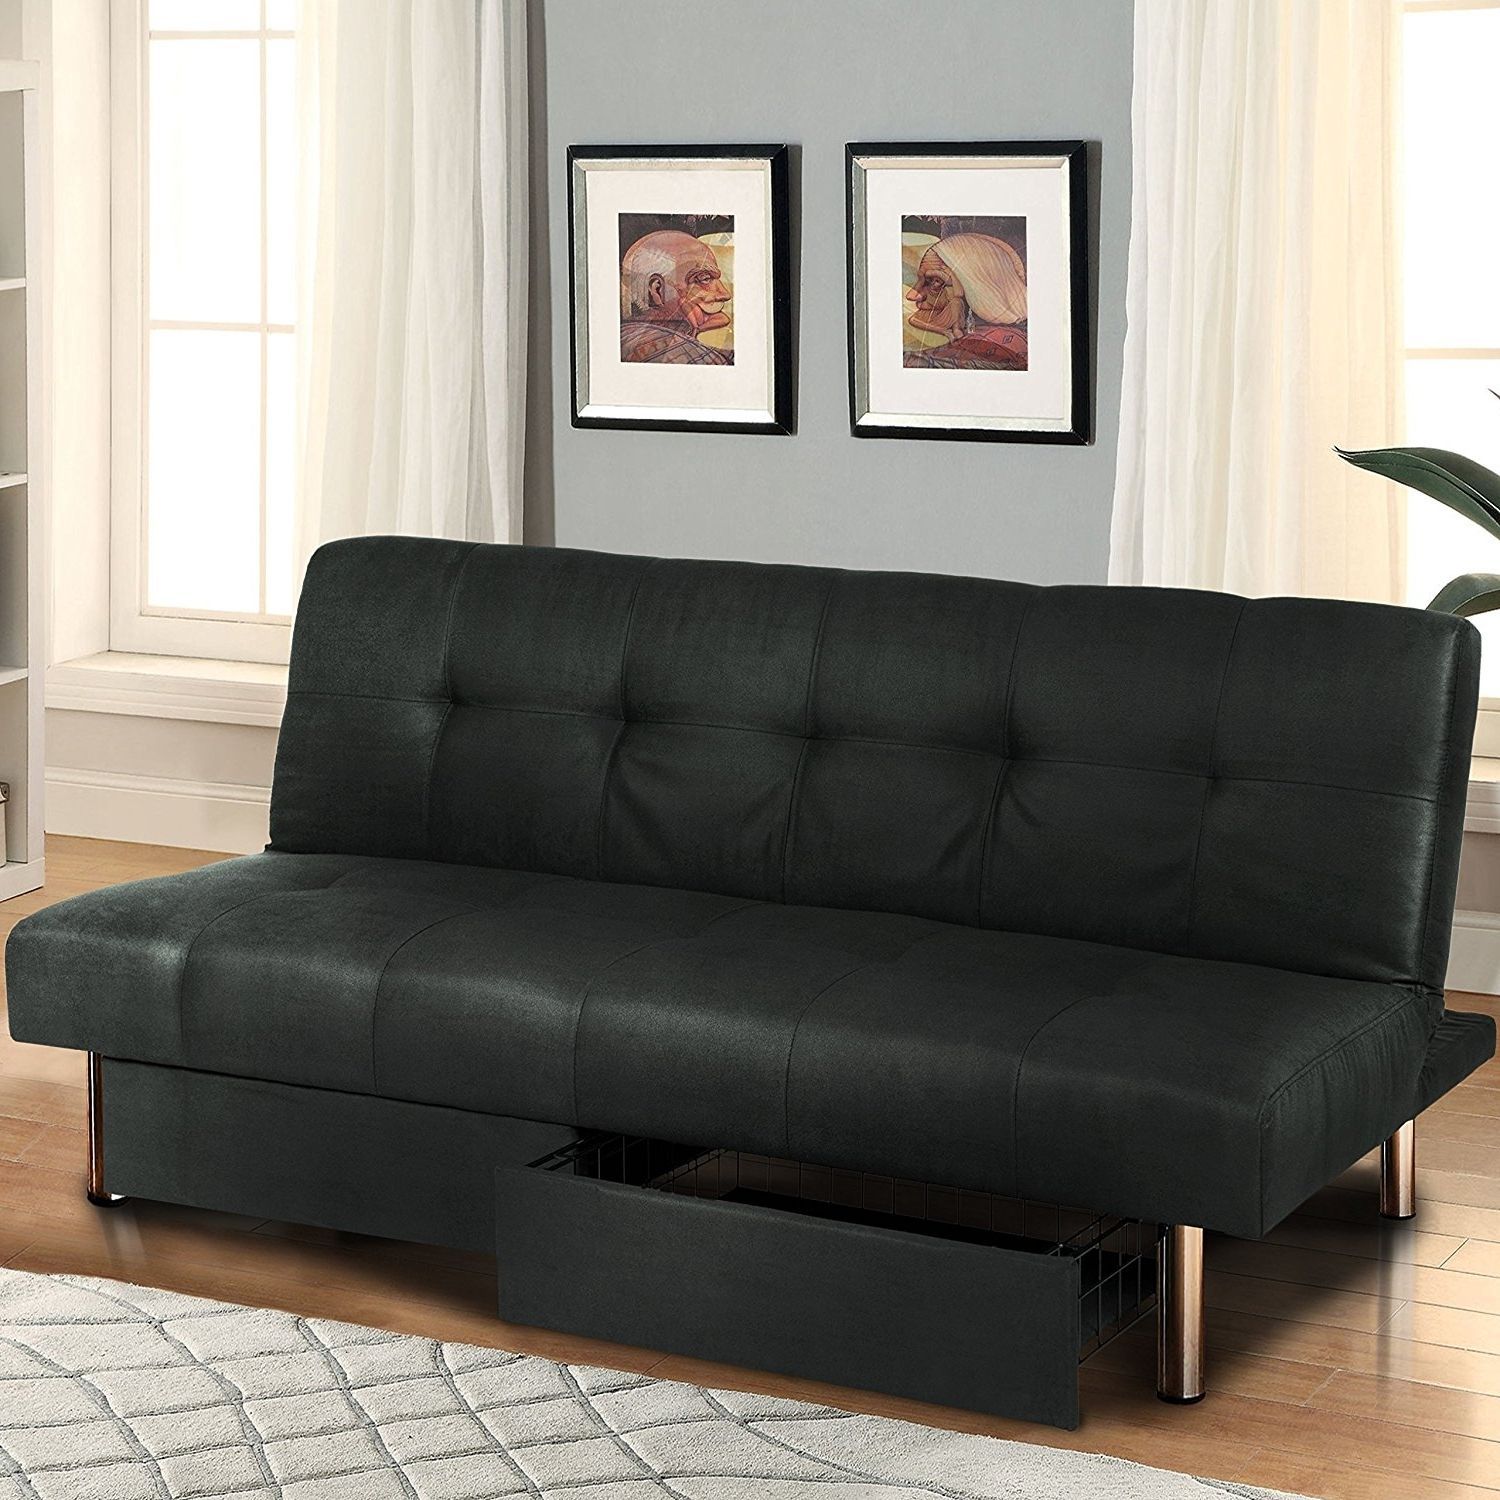 Queen Size Convertible Sofa Bed Ideas On Foter Regarding Queen Size Convertible Sofa Beds (Gallery 11 of 20)